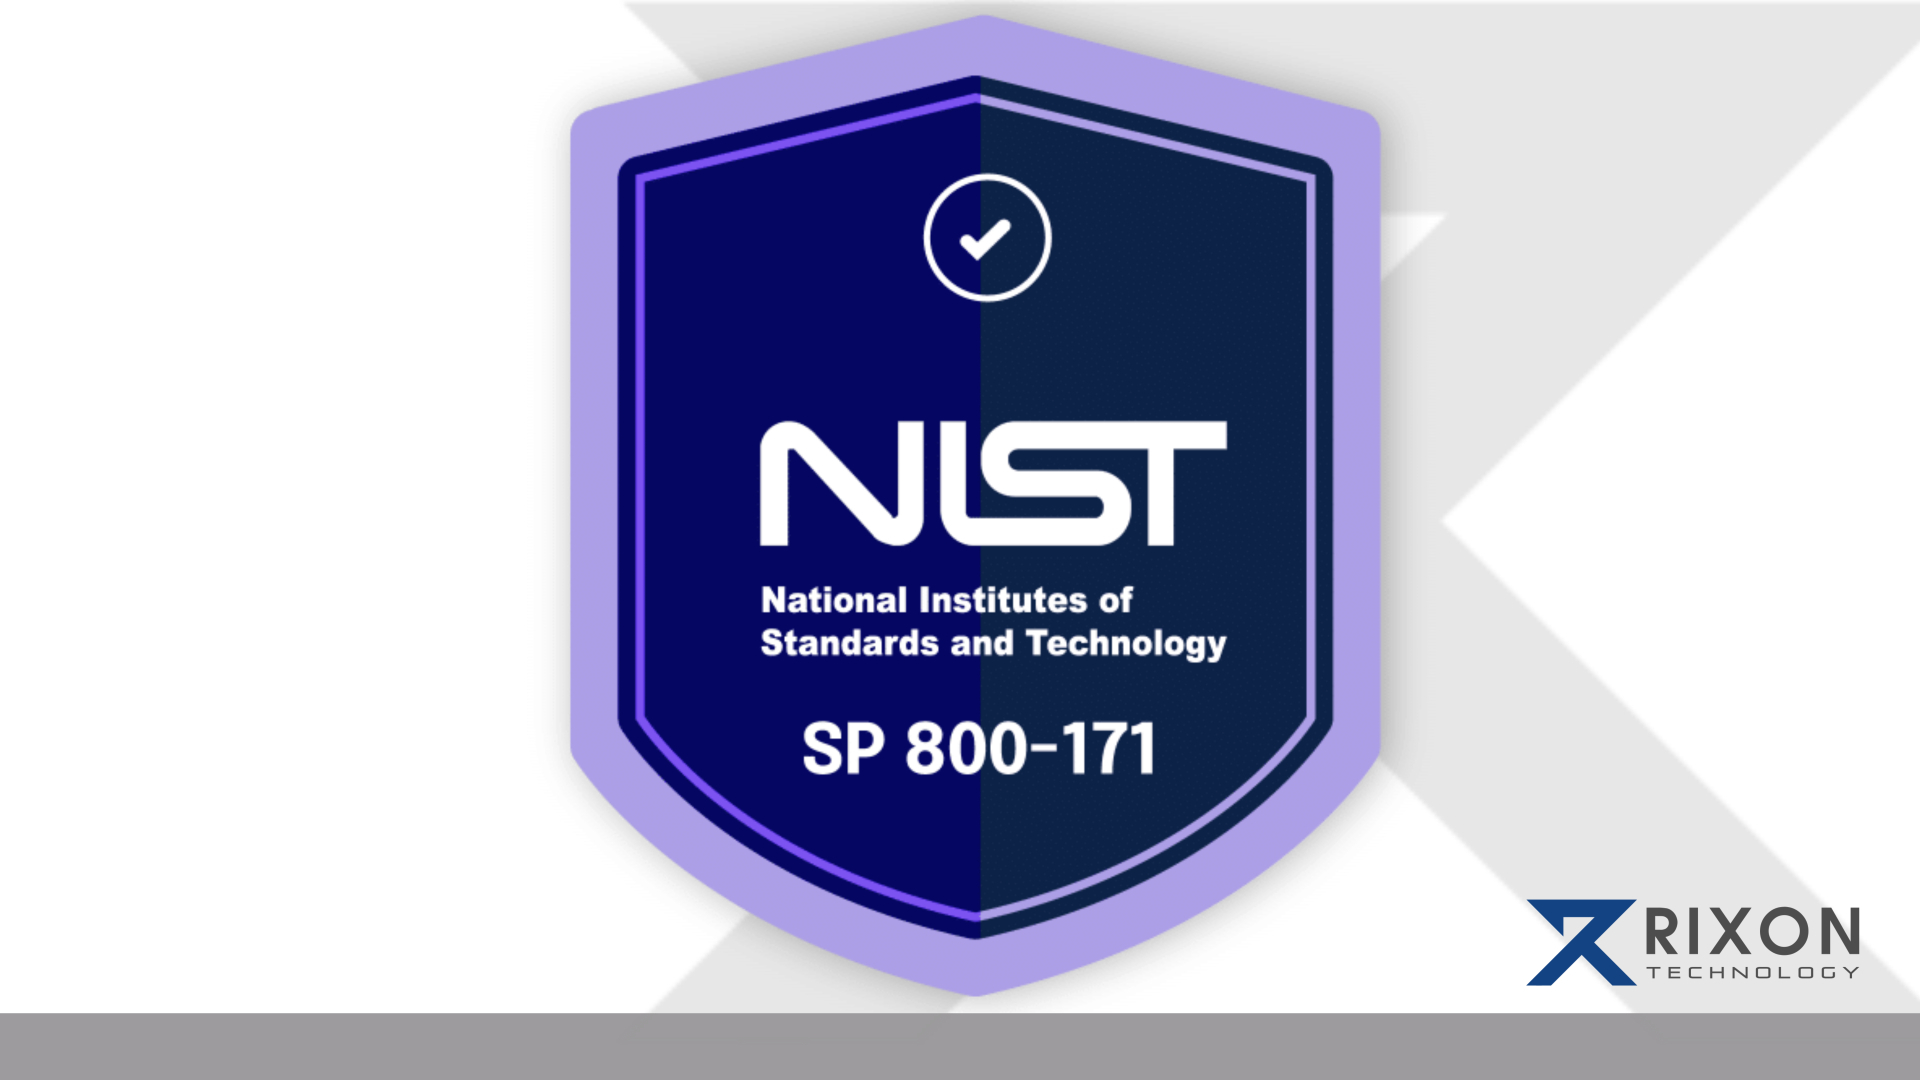 Shield-shaped emblem with a checkmark, featuring the National Institute of Standards and Technology (NIST) logo and the designation SP 800-171, against a gradient blue background. Rixon Technology logo is at the bottom right corner.